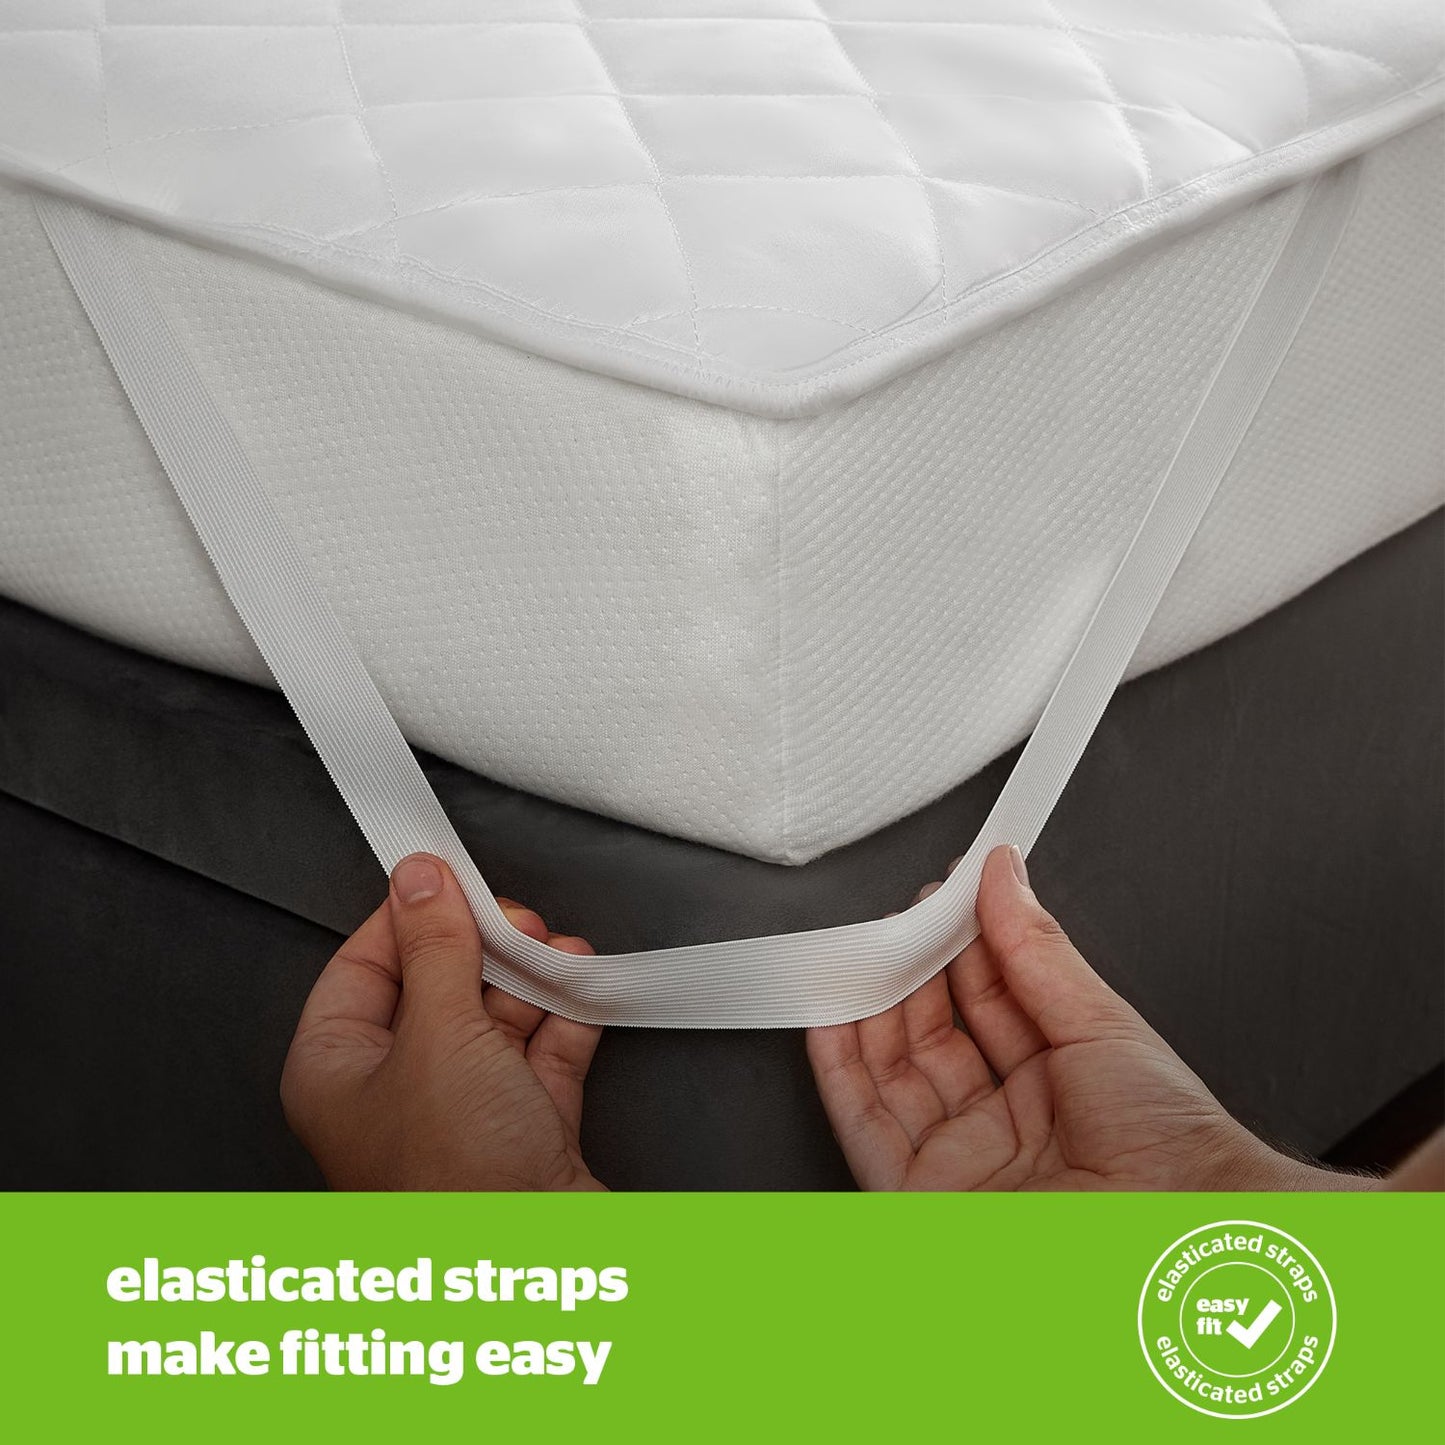 Silentnight New And Improved Anti Allergy Mattress Protector